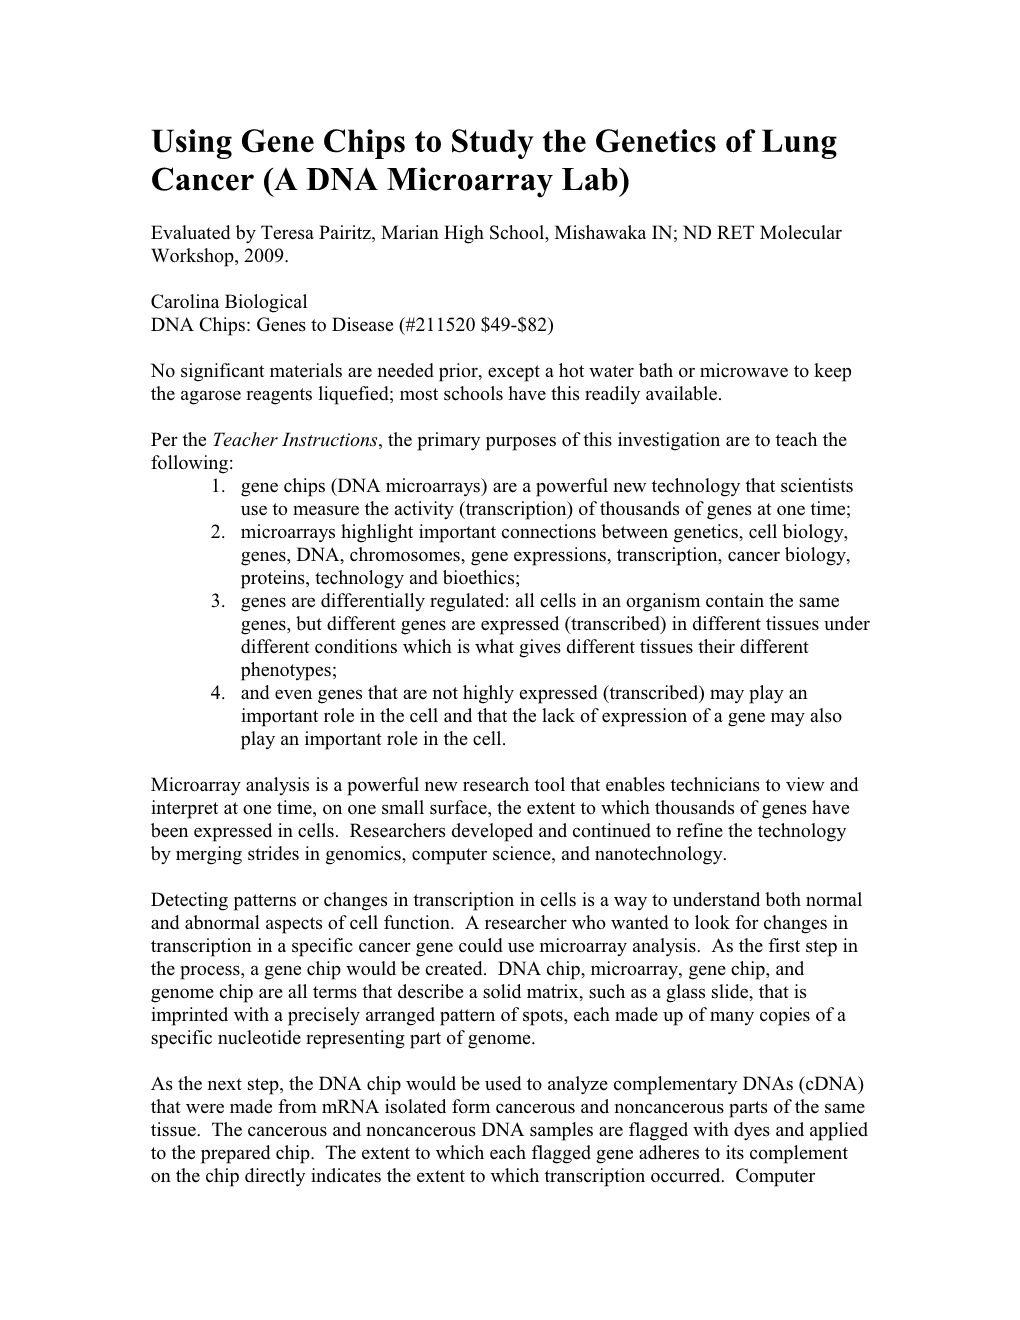 Using Gene Chips to Study the Genetics of Lung Cancer (A DNA Microarray Lab)